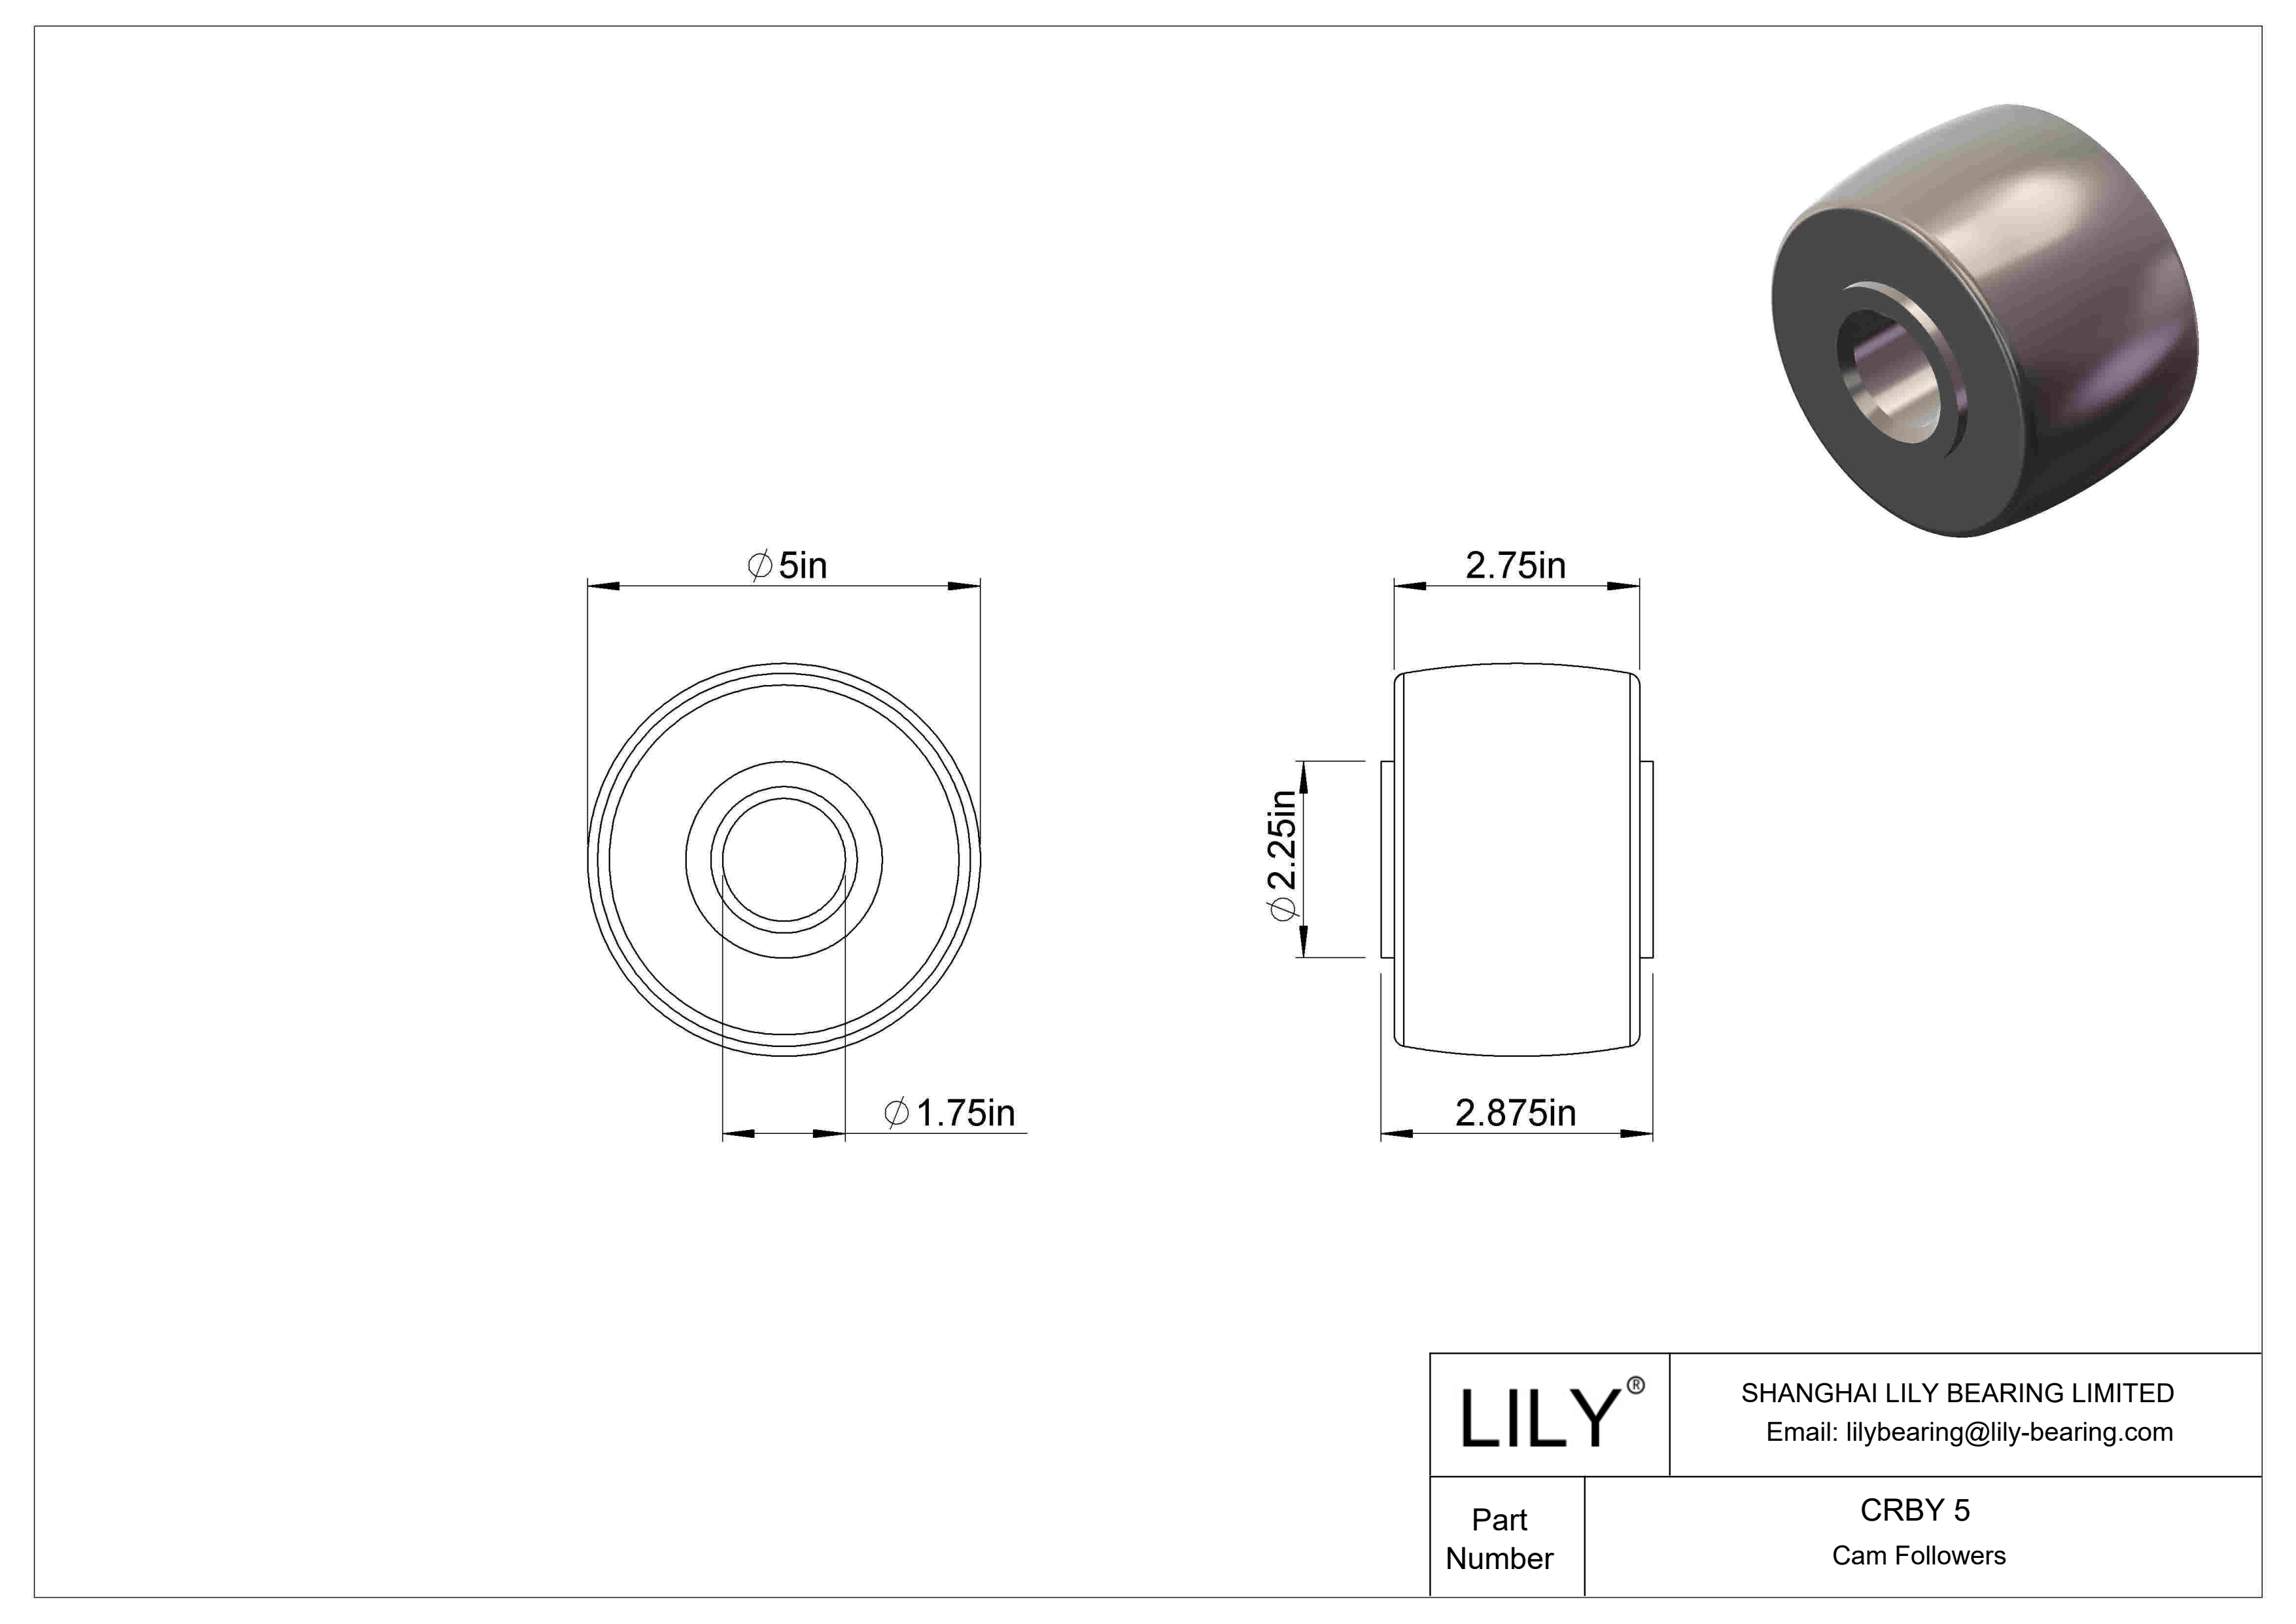 CRBY 5 Roller Cam Follower-Yoke Type cad drawing